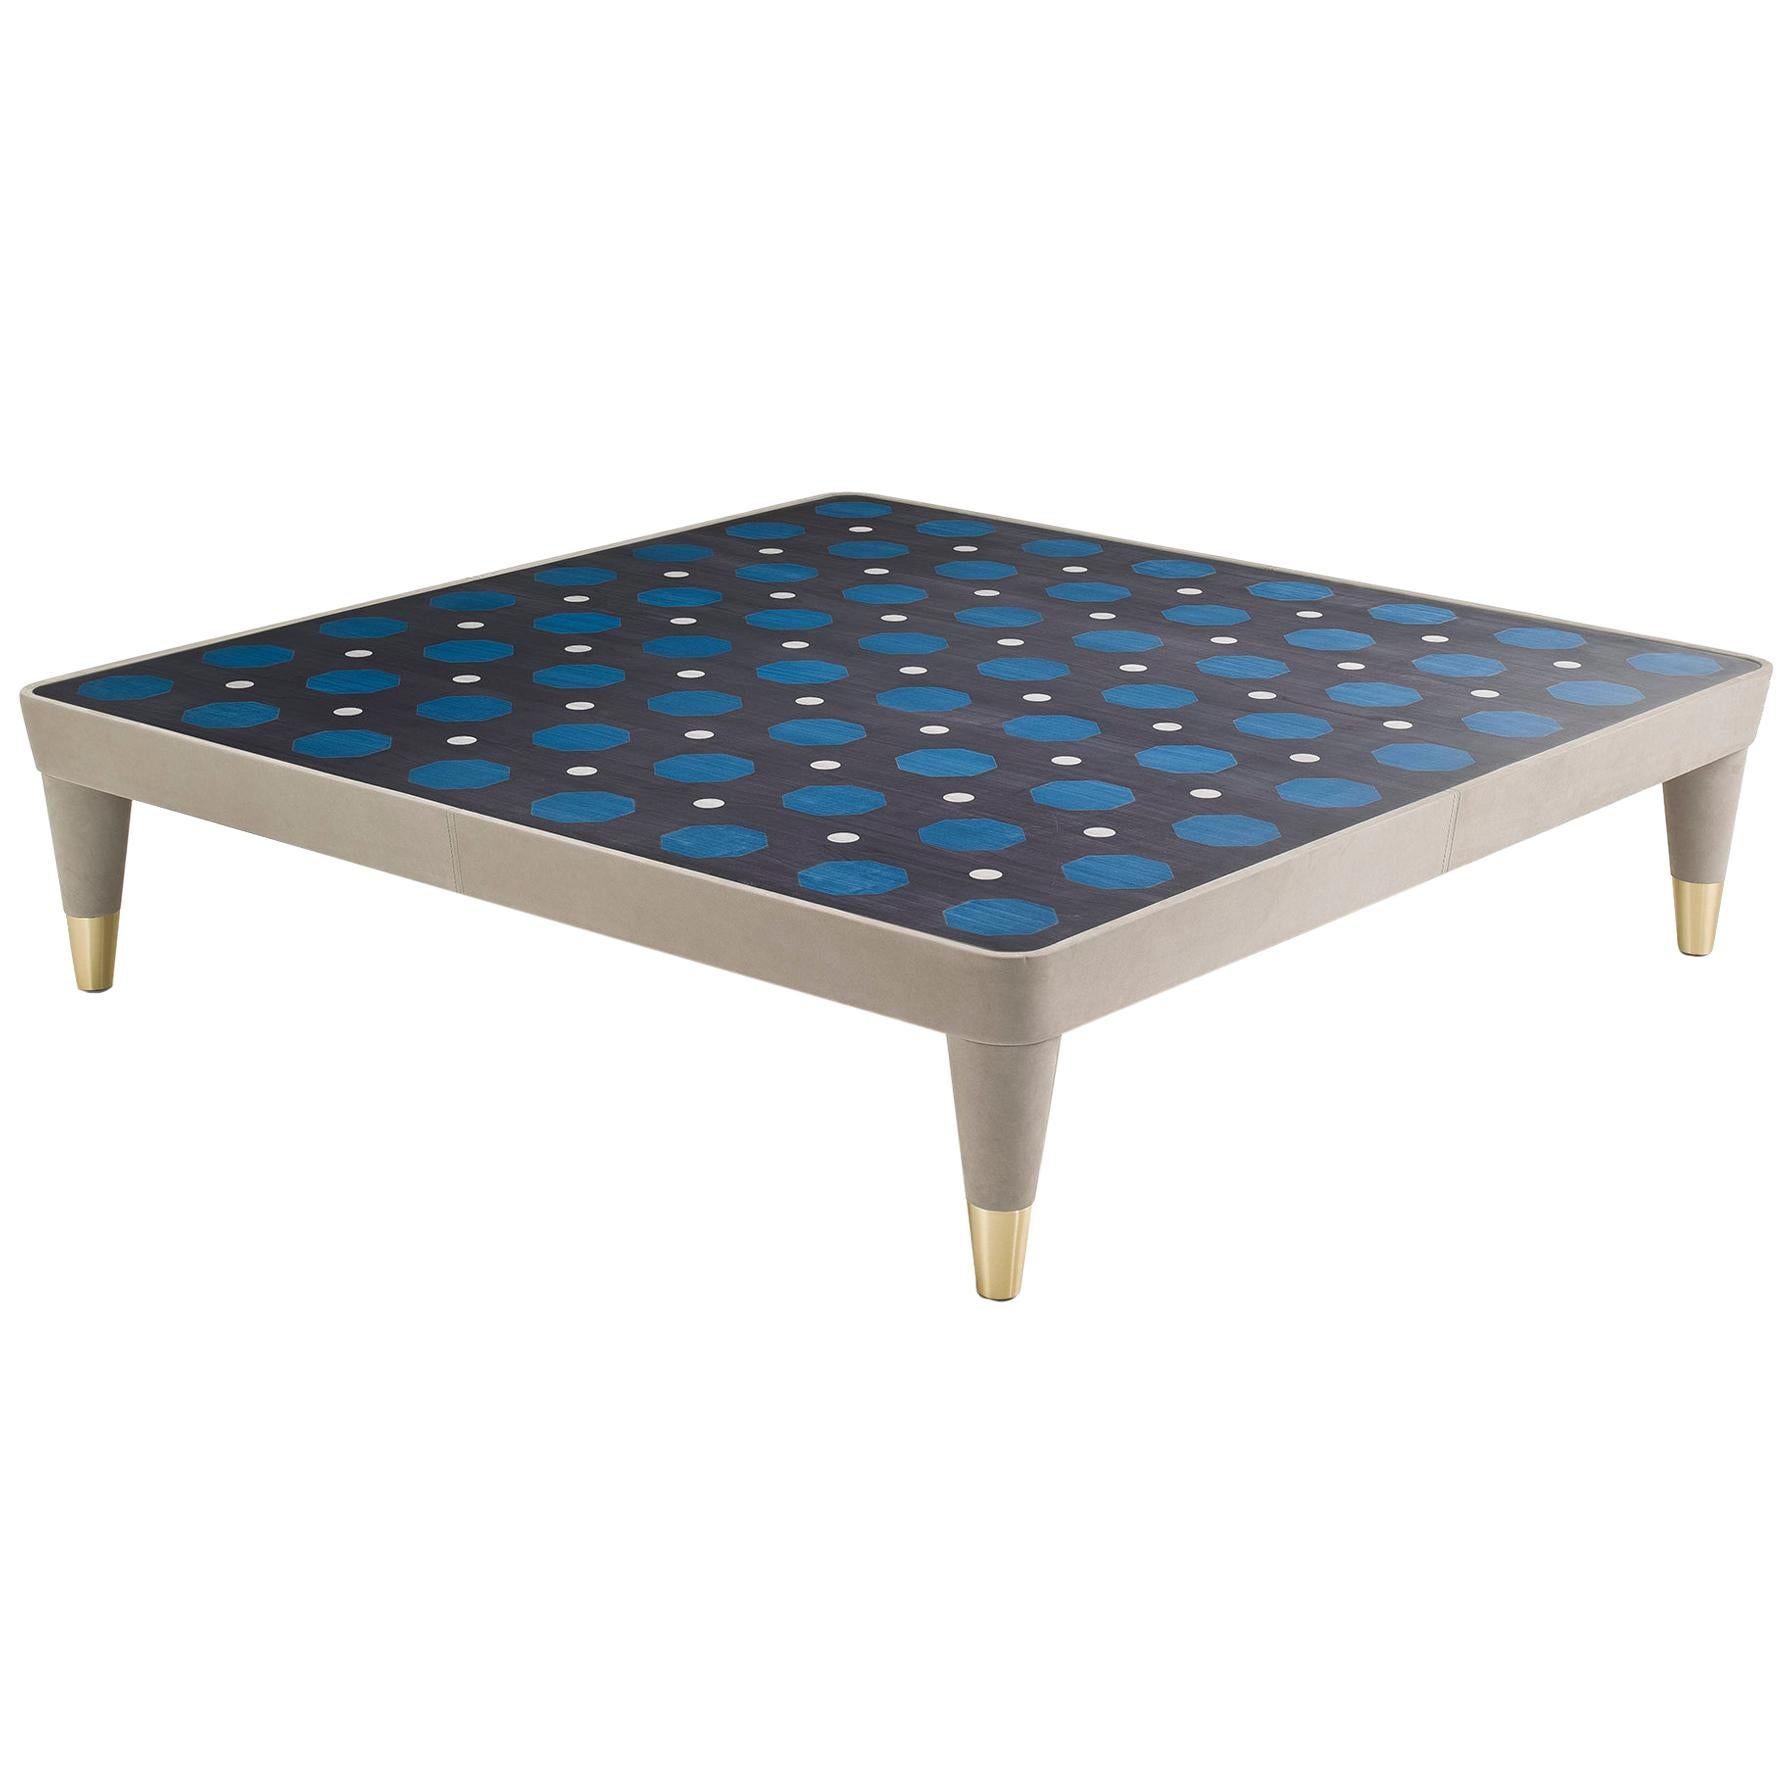 CENTURY Square Gray and Blue Geometric Coffee Table with Wooden Inlay and Brass